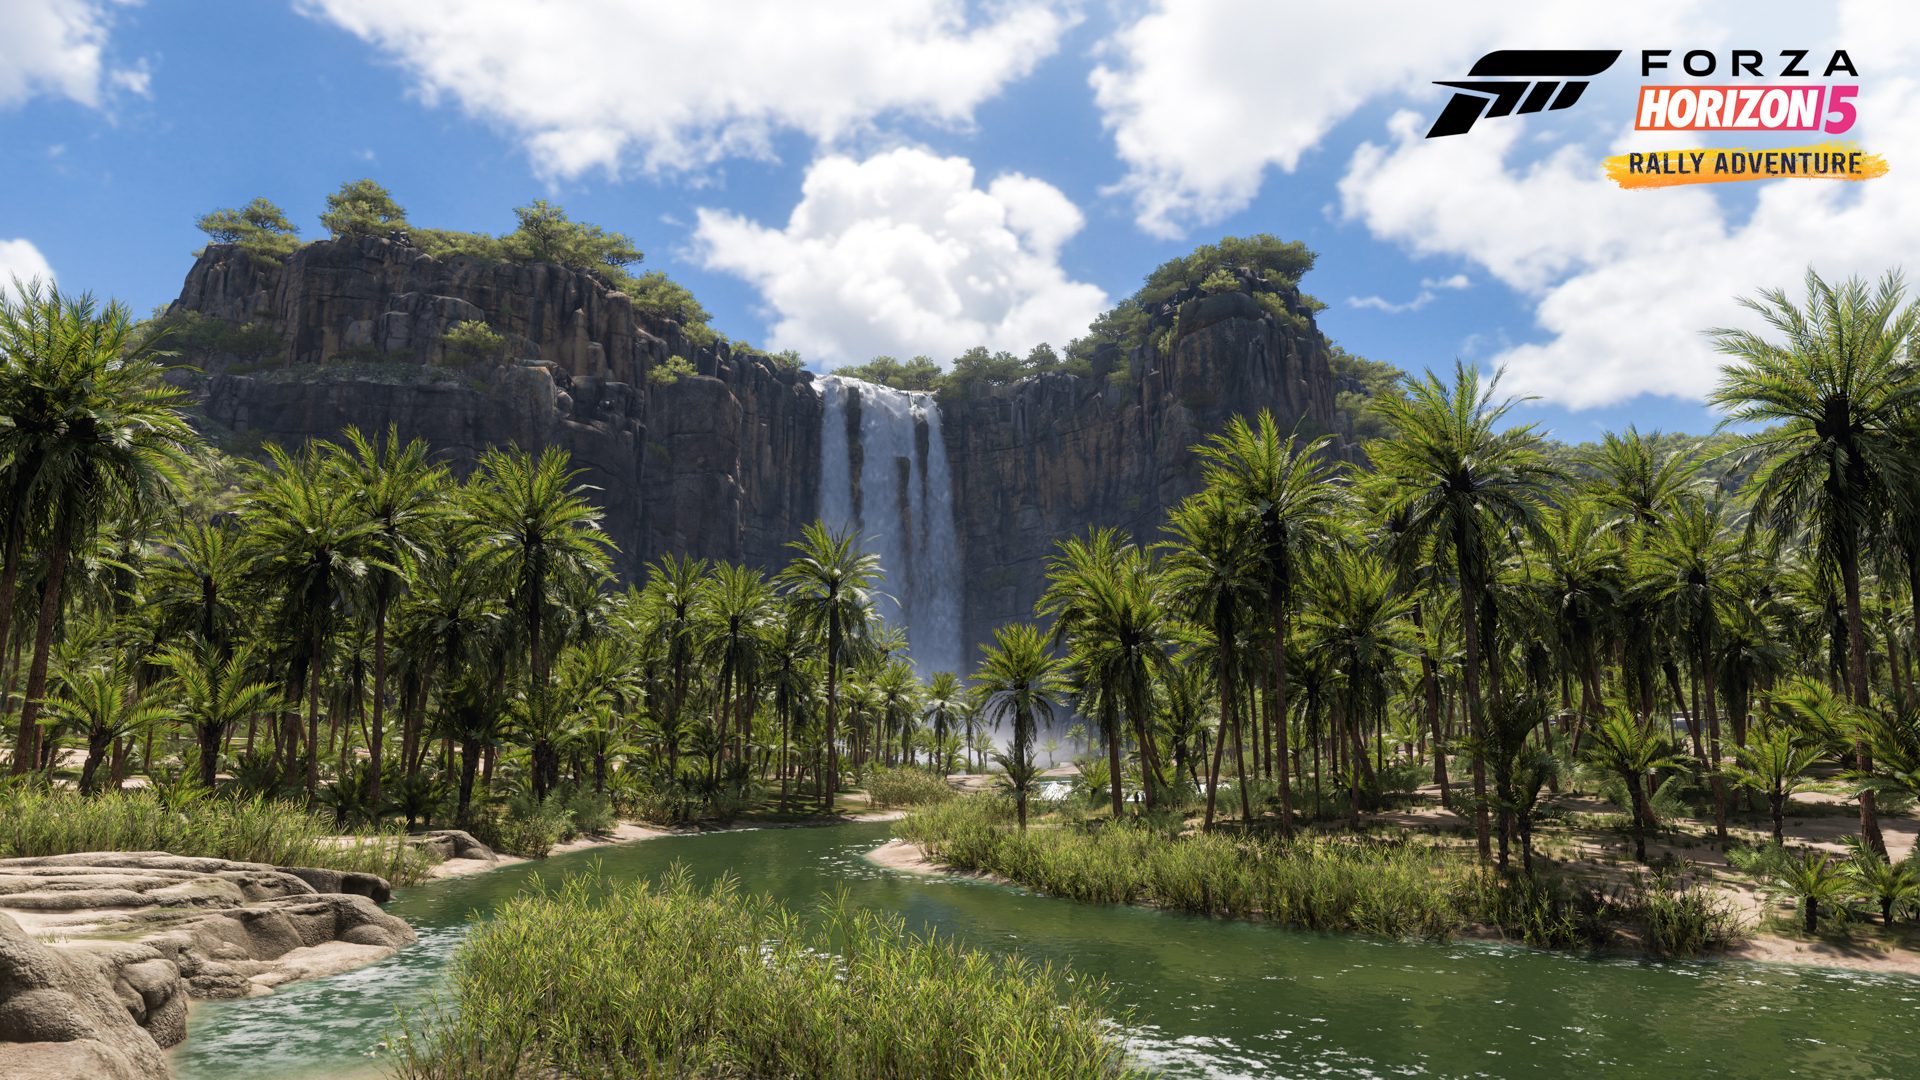 fh5-rally_adventure_expansion-biome-palm_forest-01-steam-1920x1080_wm-0649375420c328173b10-3116414